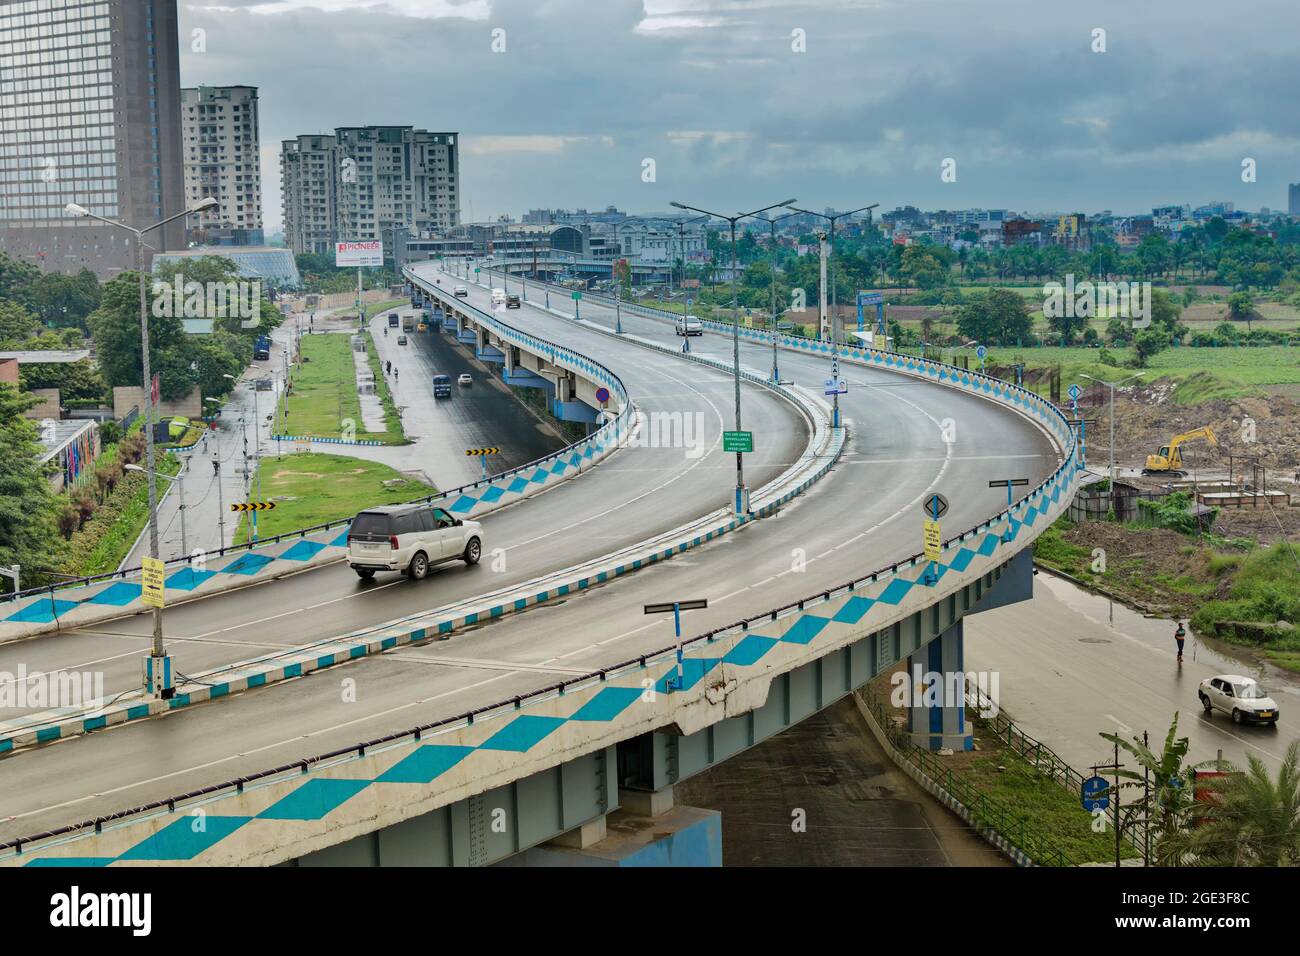 KOLKATA, WEST BENGAL , INDIA - AUGUST 7TH 2016 : Parama Island flyover, popularly known as Ma or Maa flyover is a 4.5 kilometer long flyover in Kolkat Stock Photo